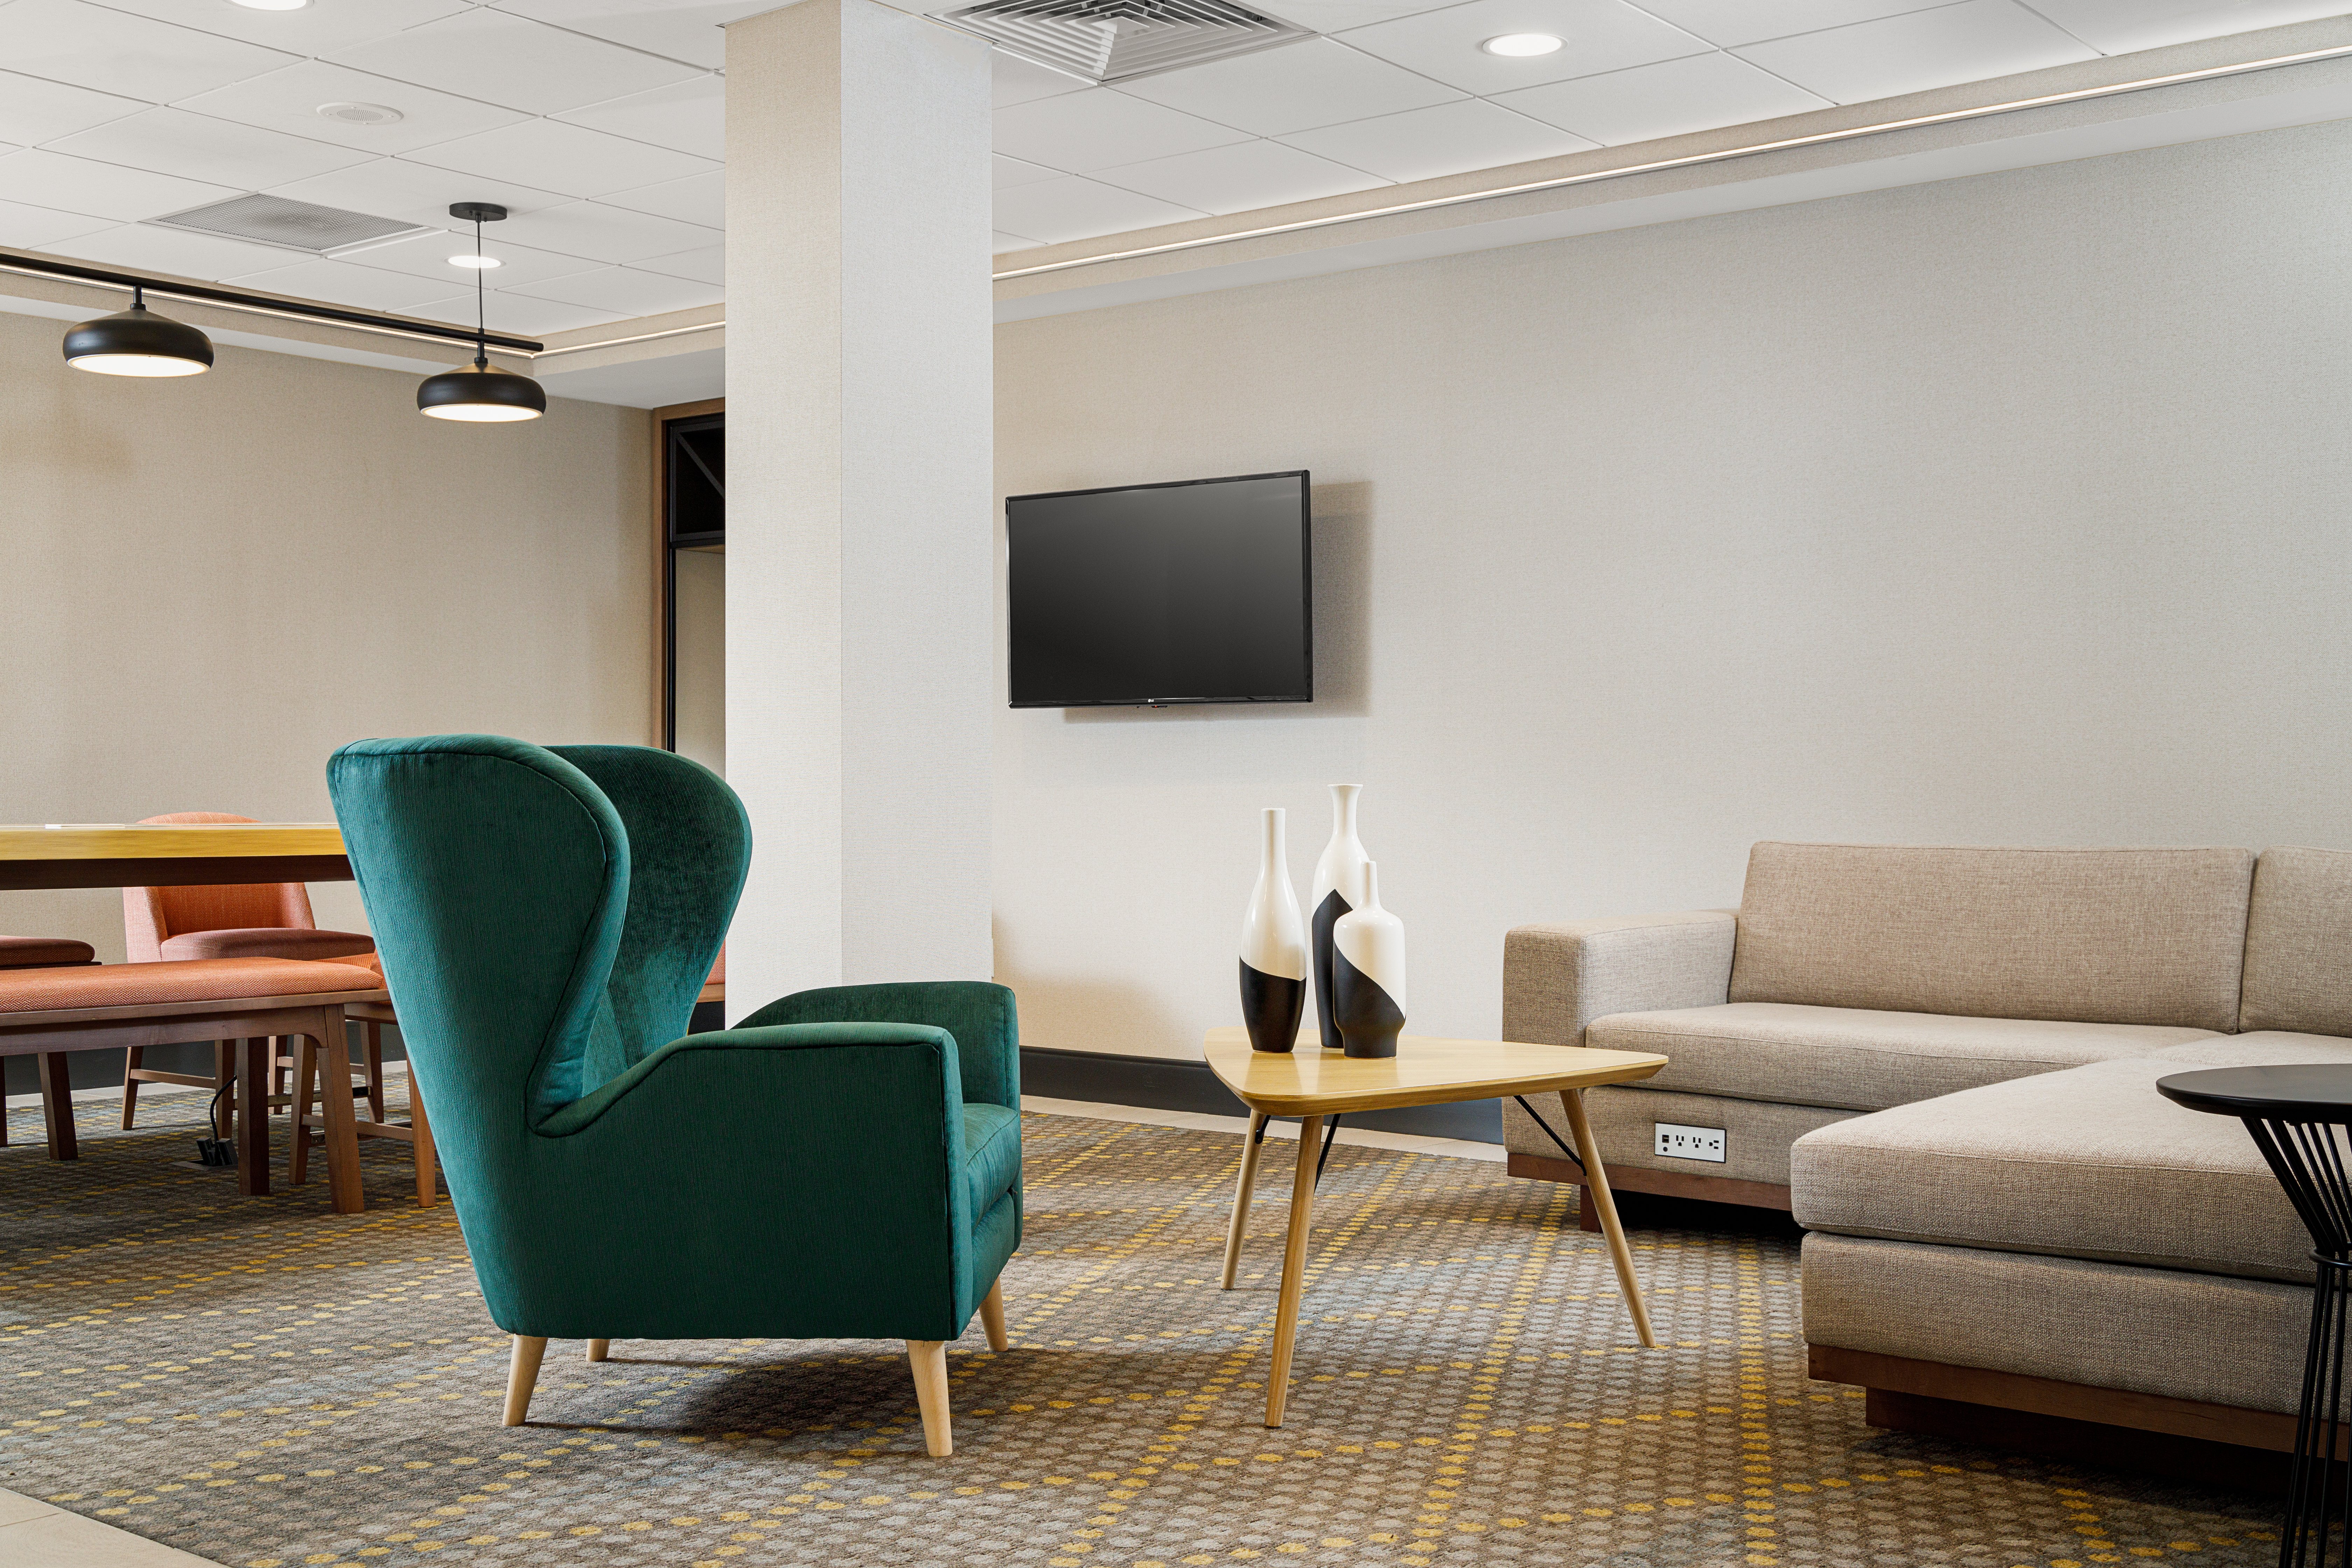 Catch up on work, watch the news, or relax in our modern lobby.  